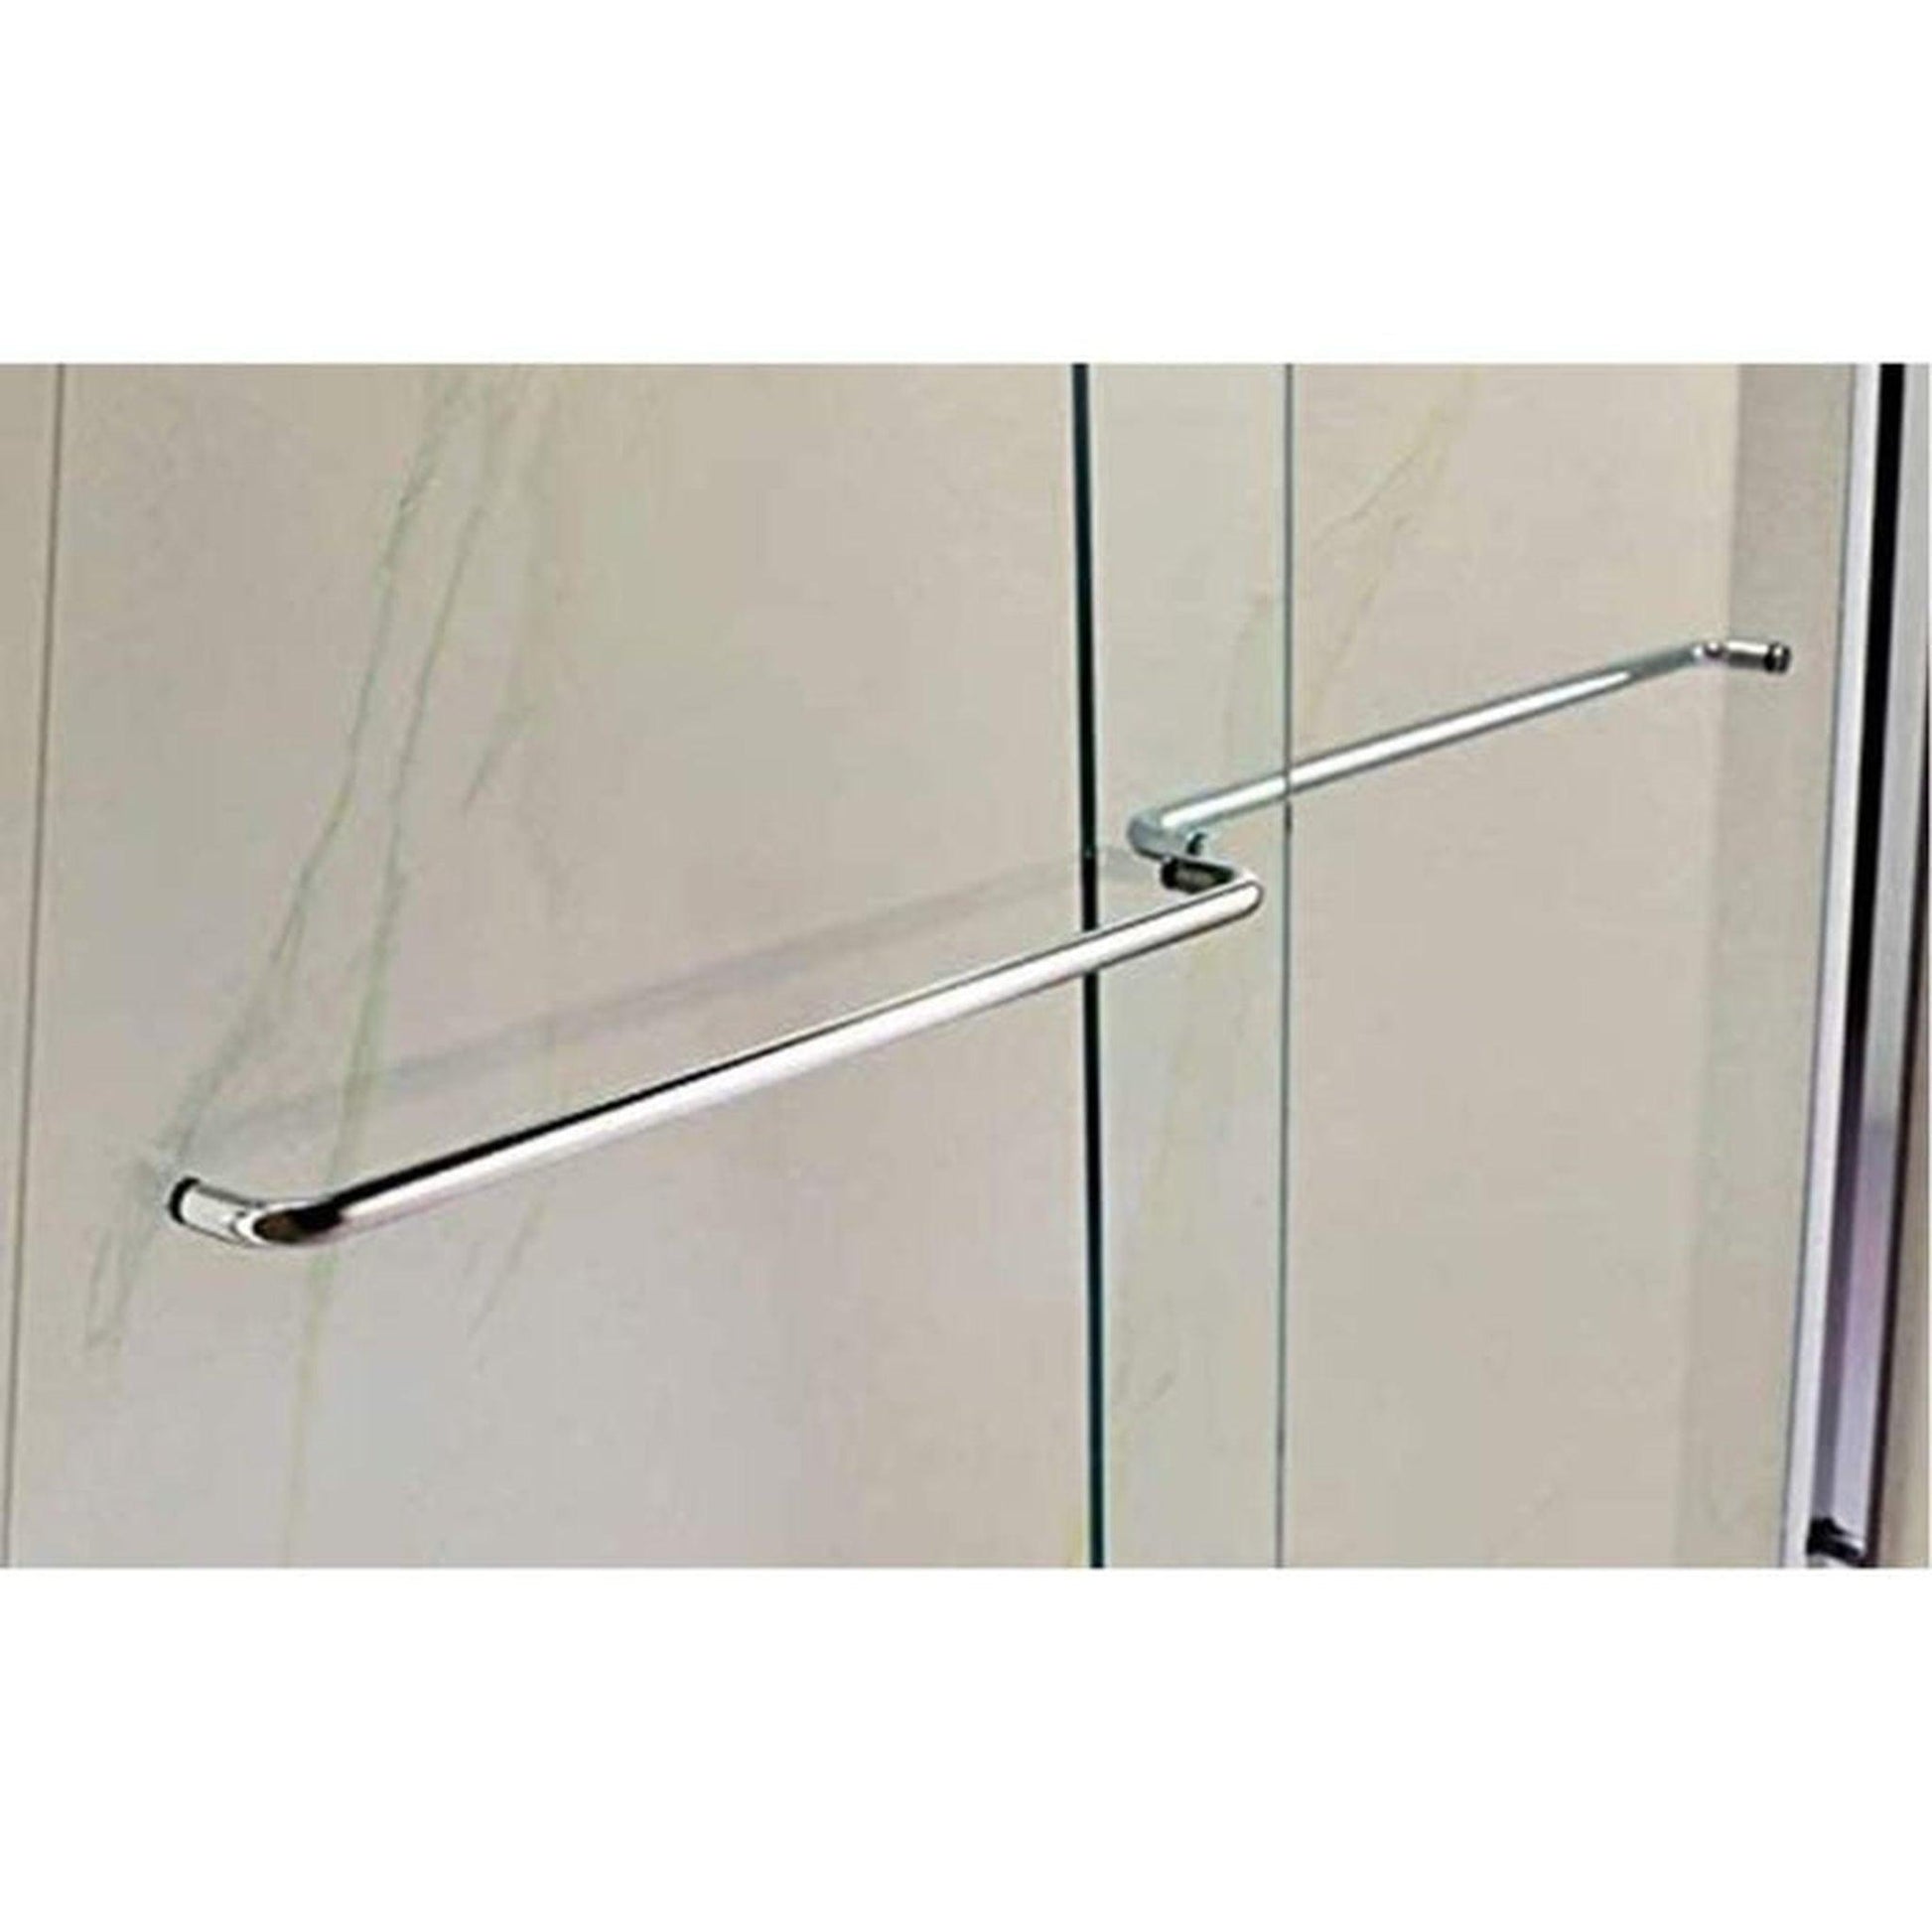 Vanity Art 76" H x 60" W Clear Tempered Glass Single Sliding Frameless Shower Door With Polished Chrome Hardware